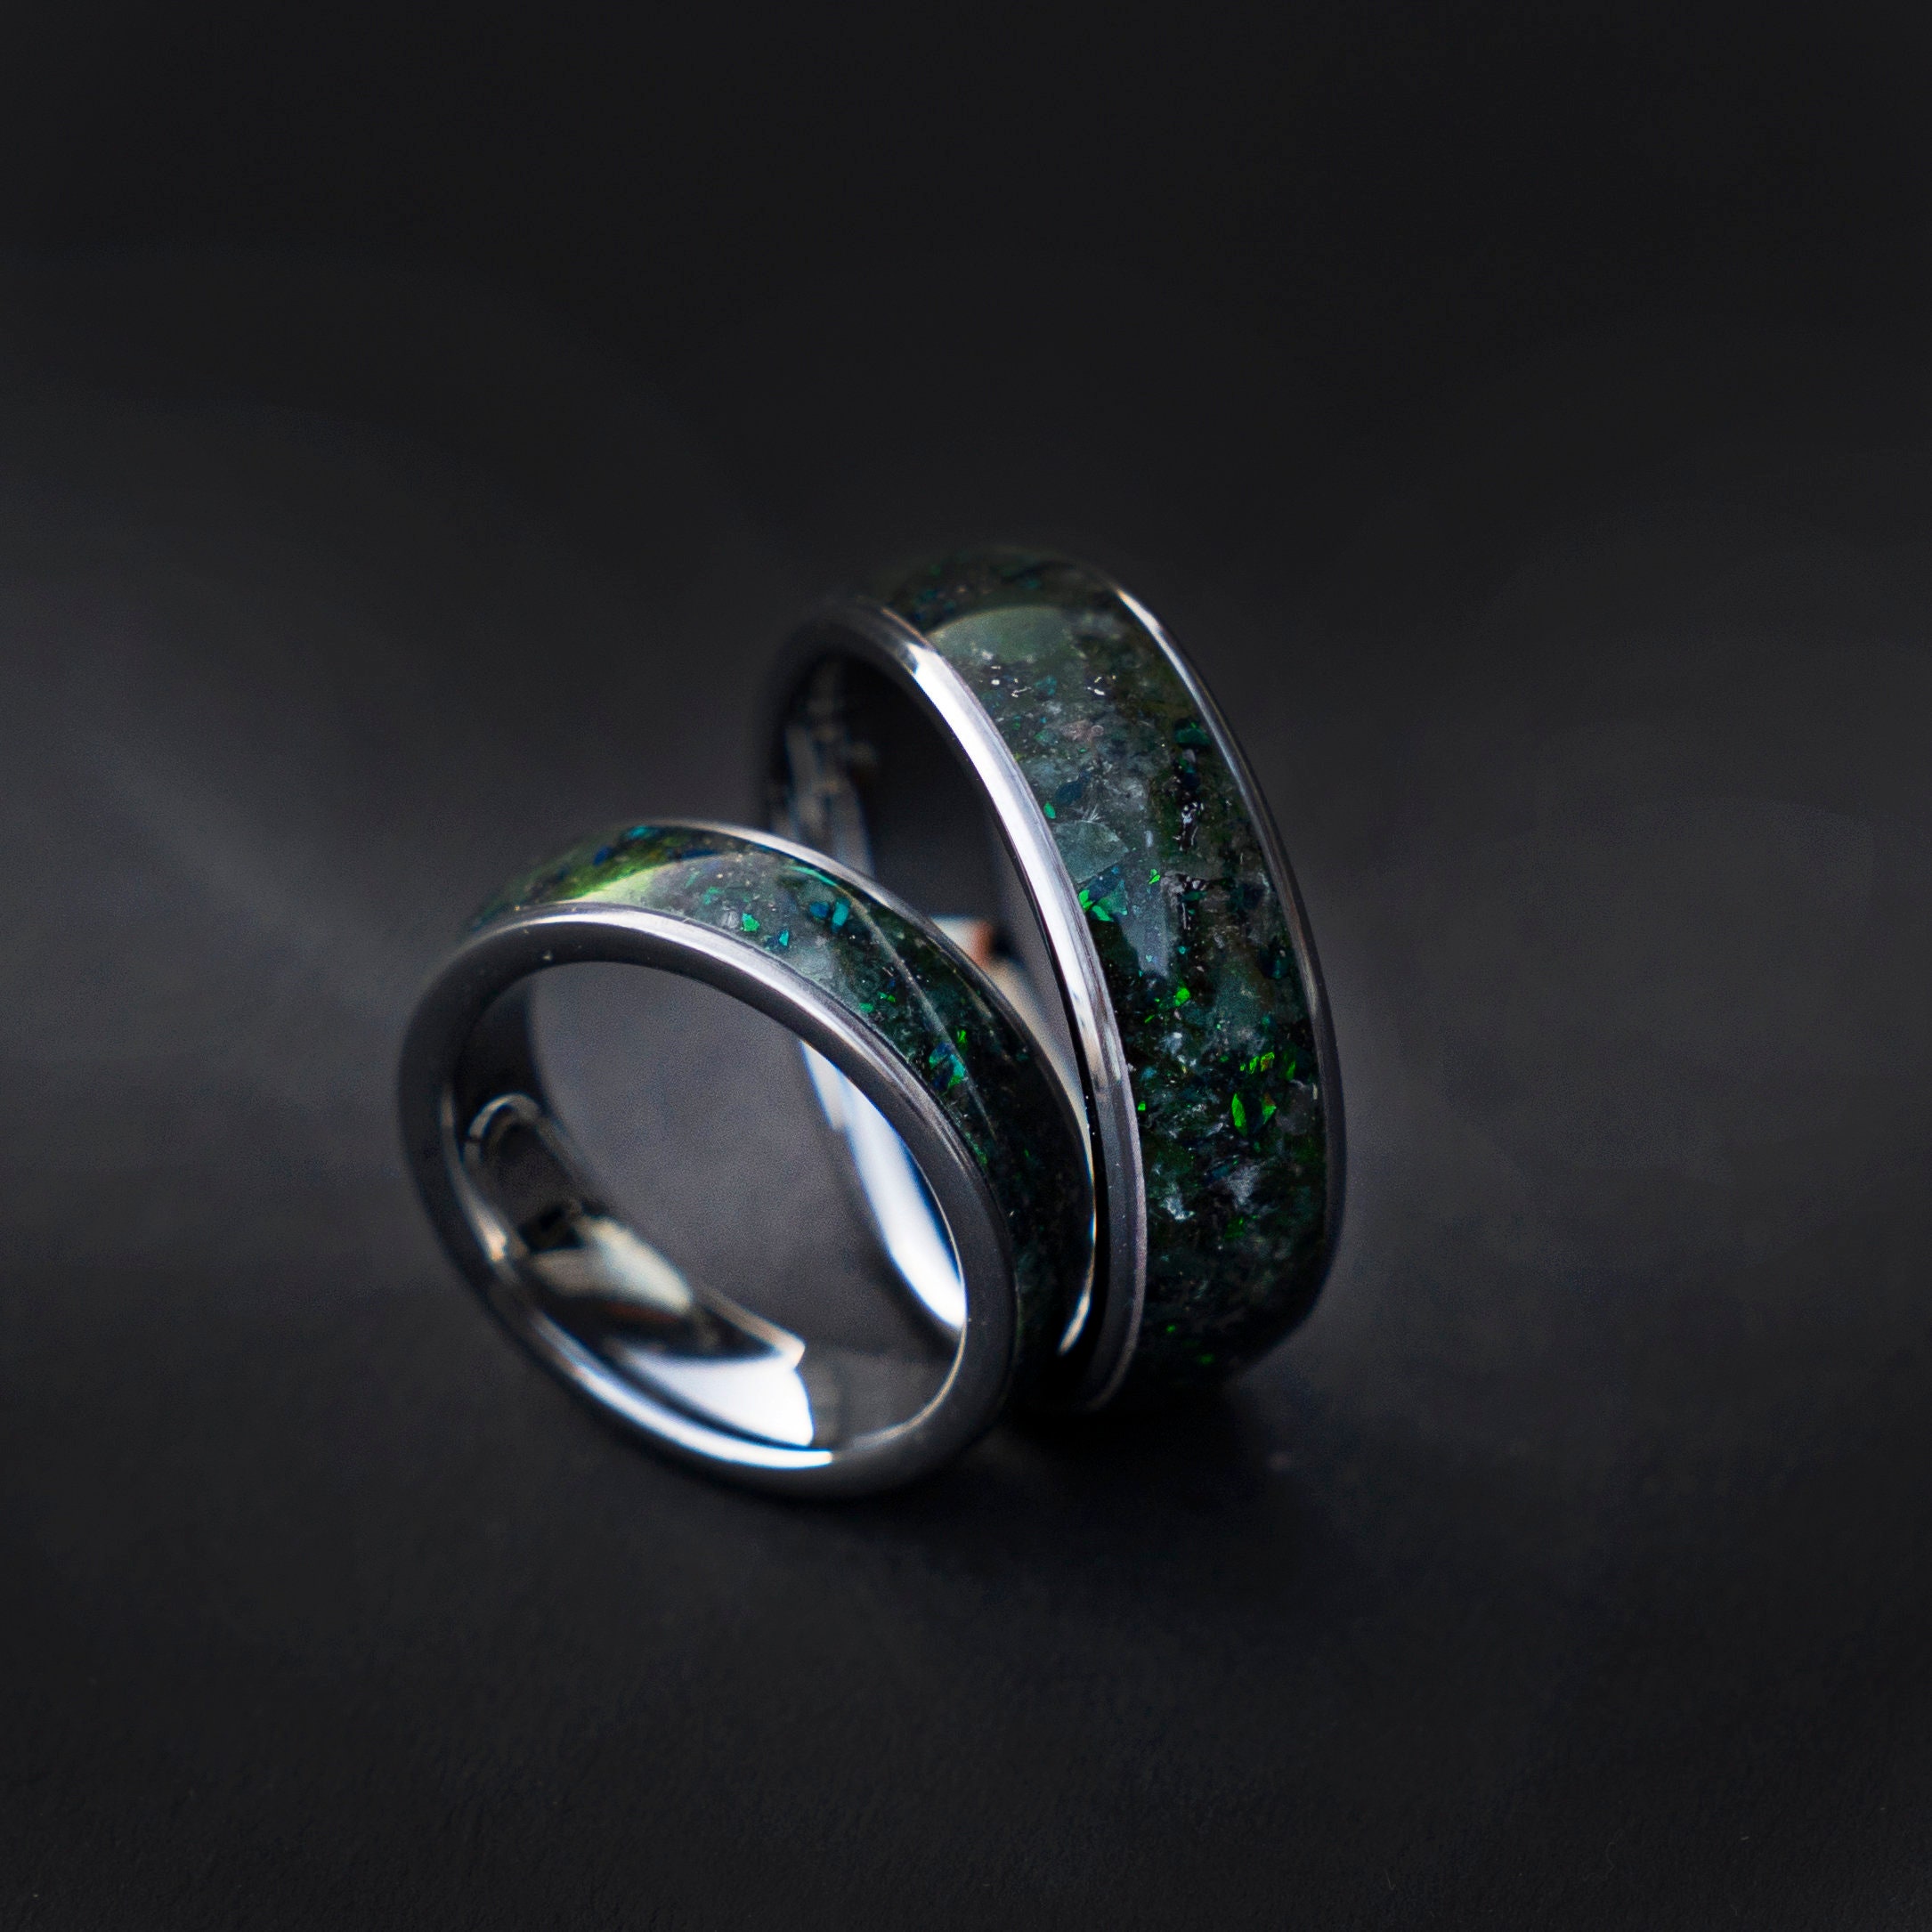 Couples ringset with Moss agate, engagement ring, moss agate jewelry ...